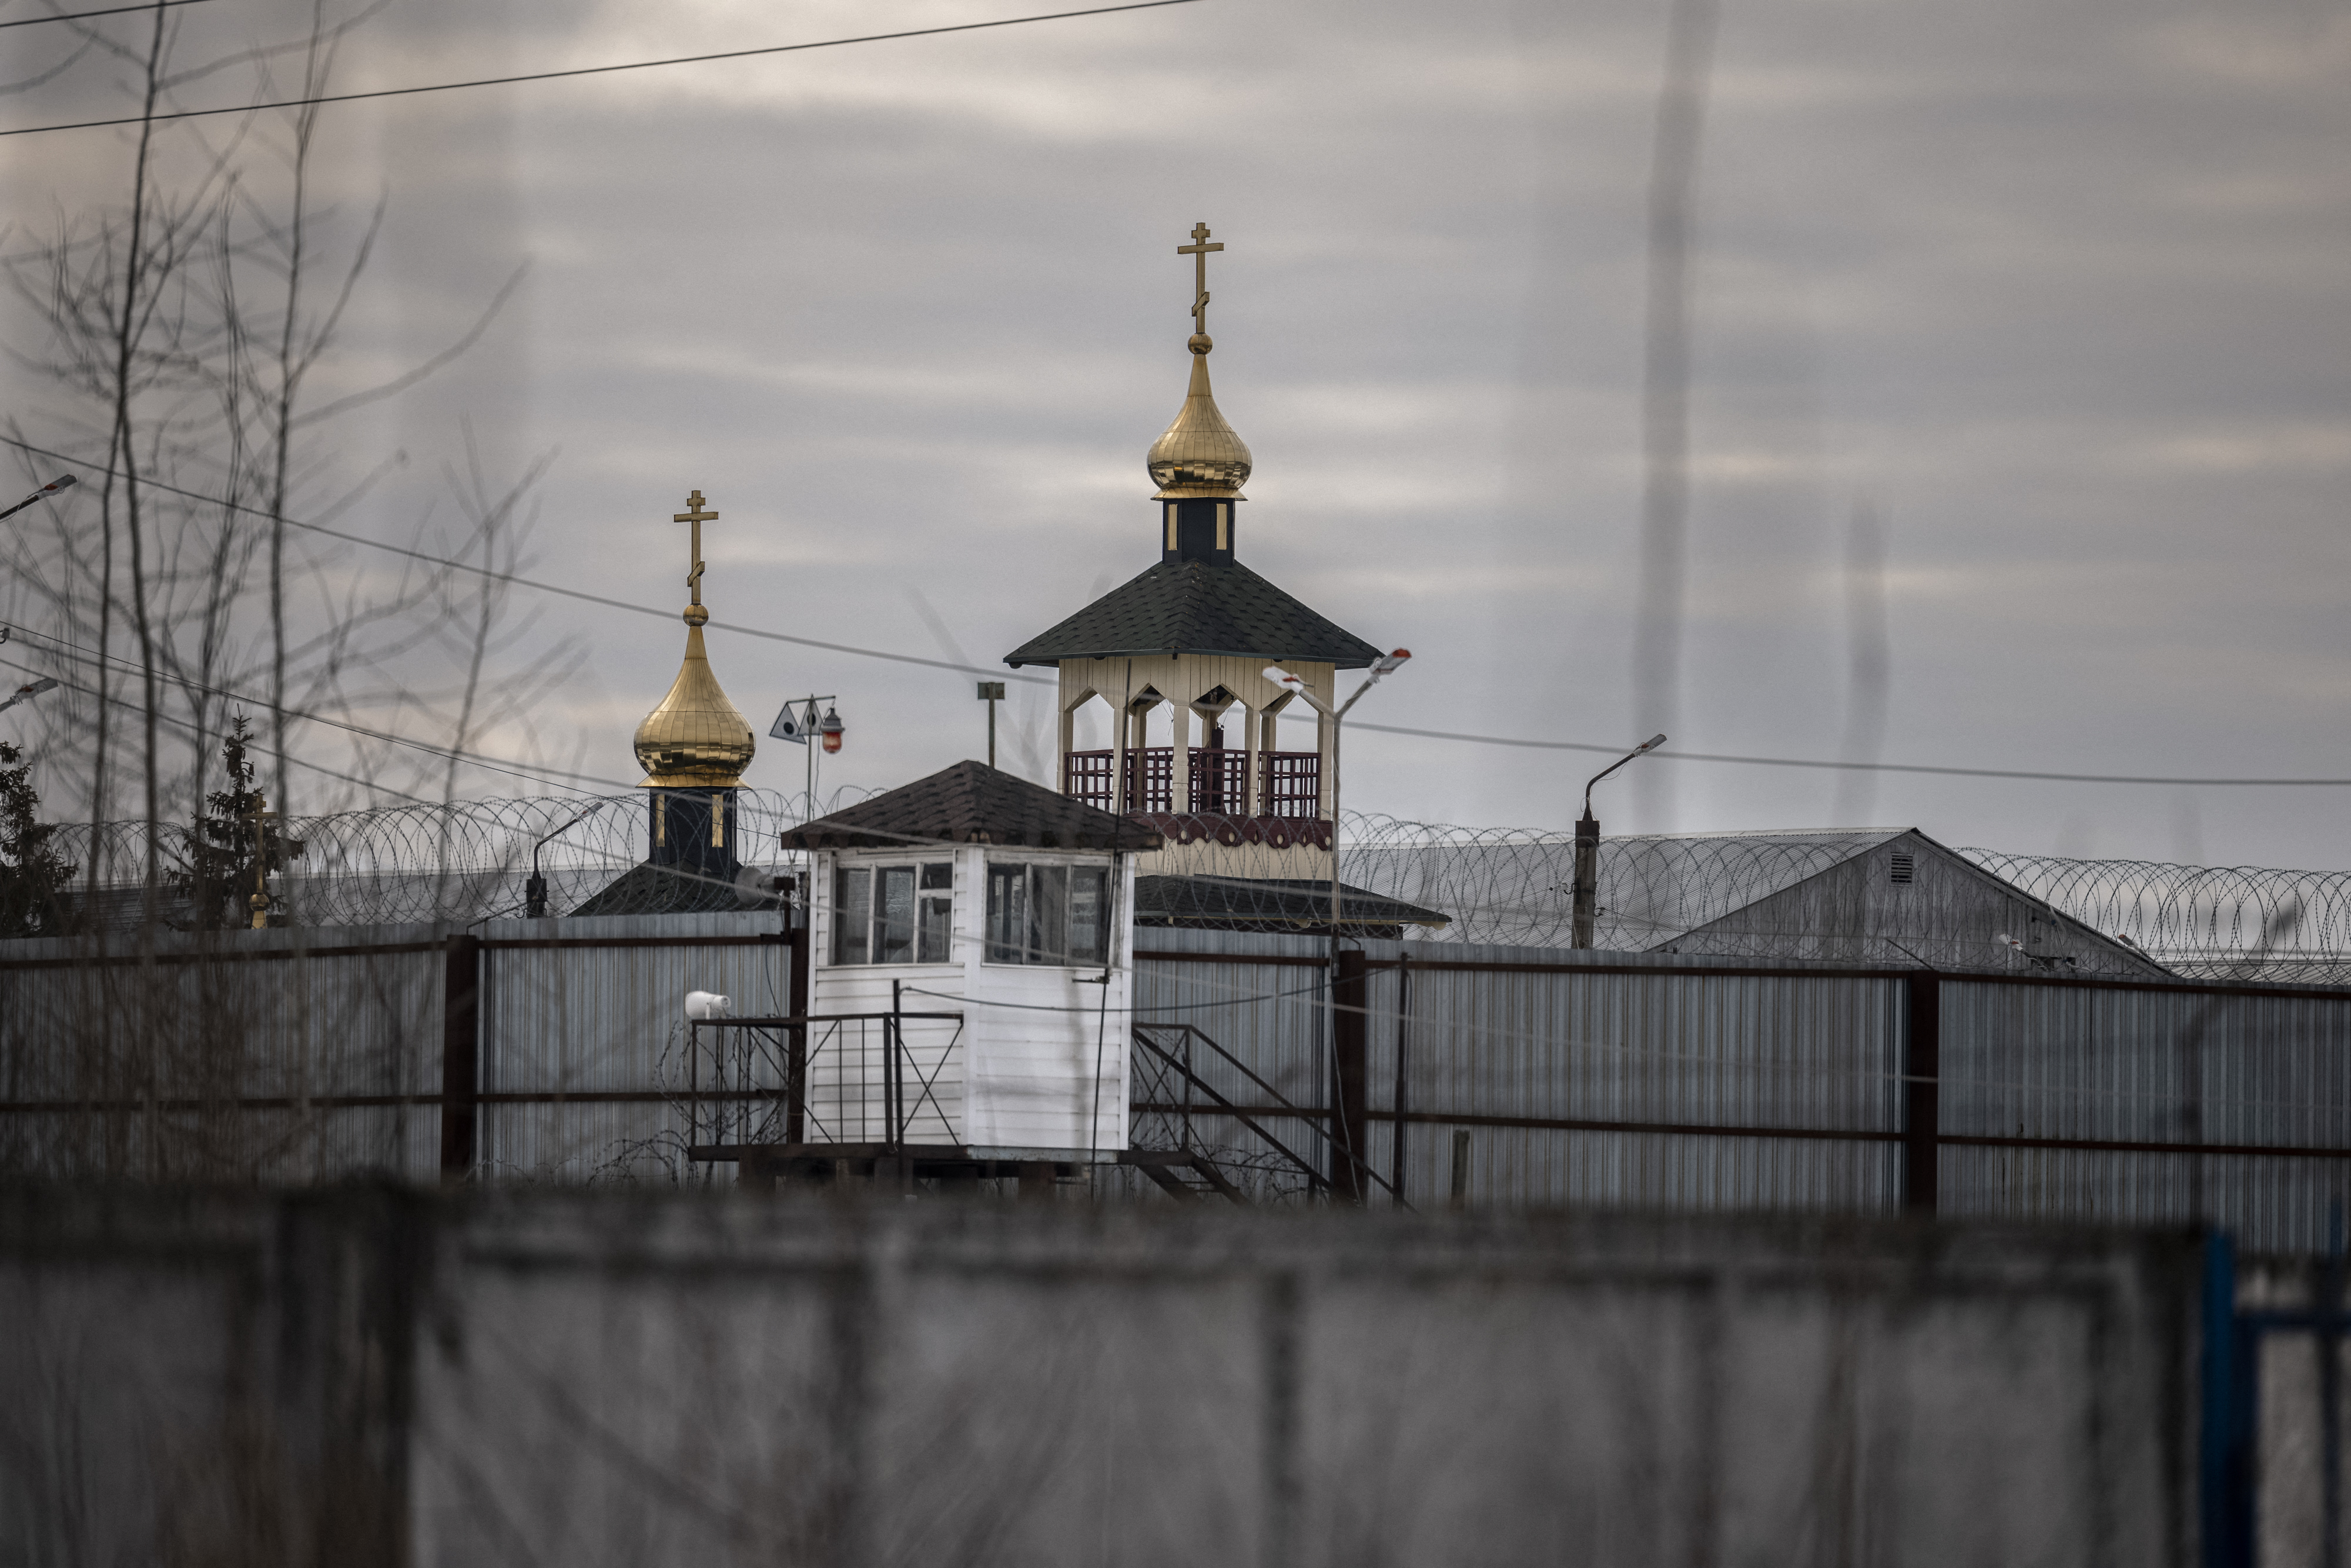 A view shows an Orthodox church on the grounds of the penal colony N2, where Kremlin critic Alexei Navalny has been transferred to serve a two-and-a-half year prison term for violating parole, in the town of Pokrov on March 1, 2021. (Photo by Dimitar DILKOFF / AFP)